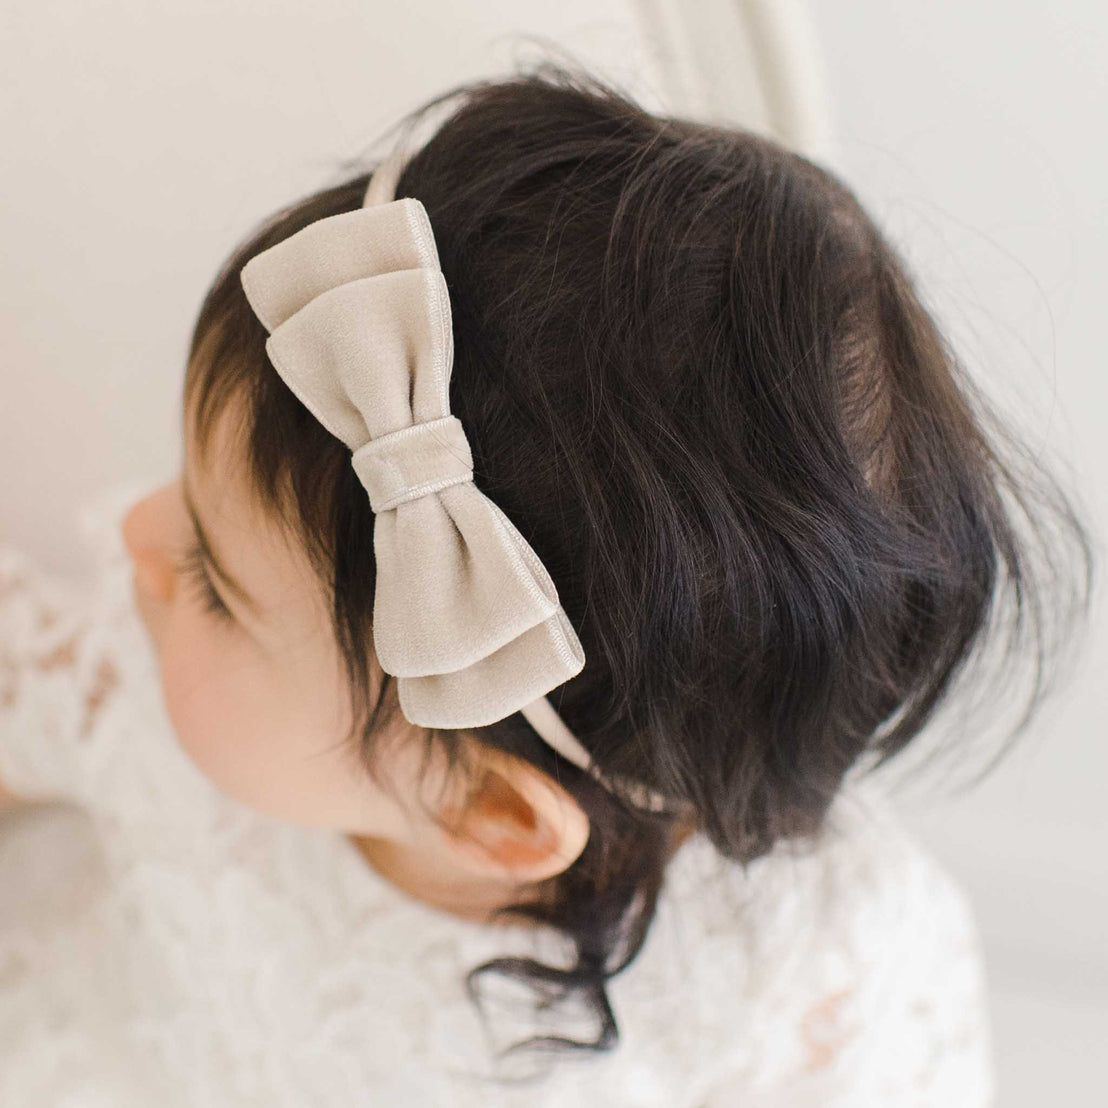 A close-up of a baby with a Rose Velvet Bow Headband in their hair, focusing on the top of their head and the light gray bow against dark hair. The visible part of their outfit suggests a